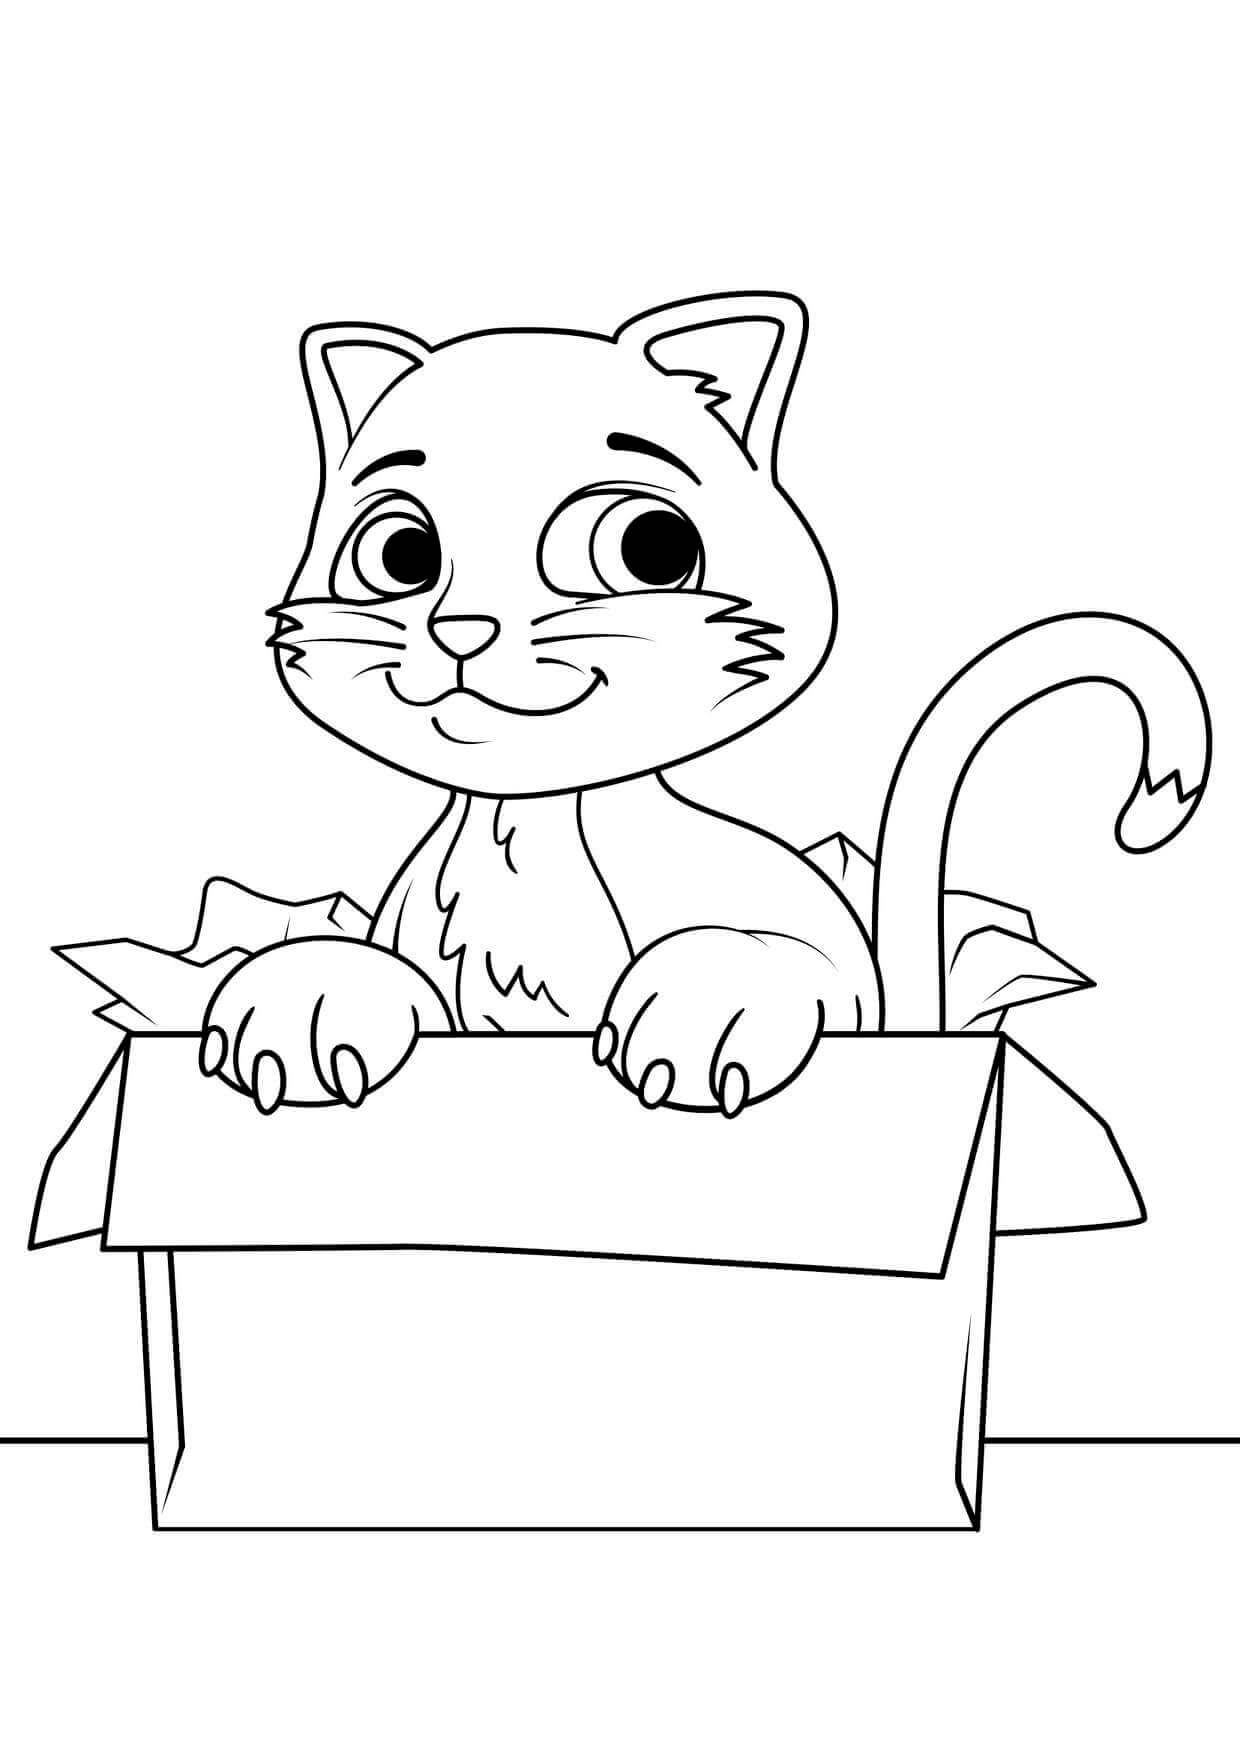 View Coloring Pages For Girls Printable Gif COLORIST